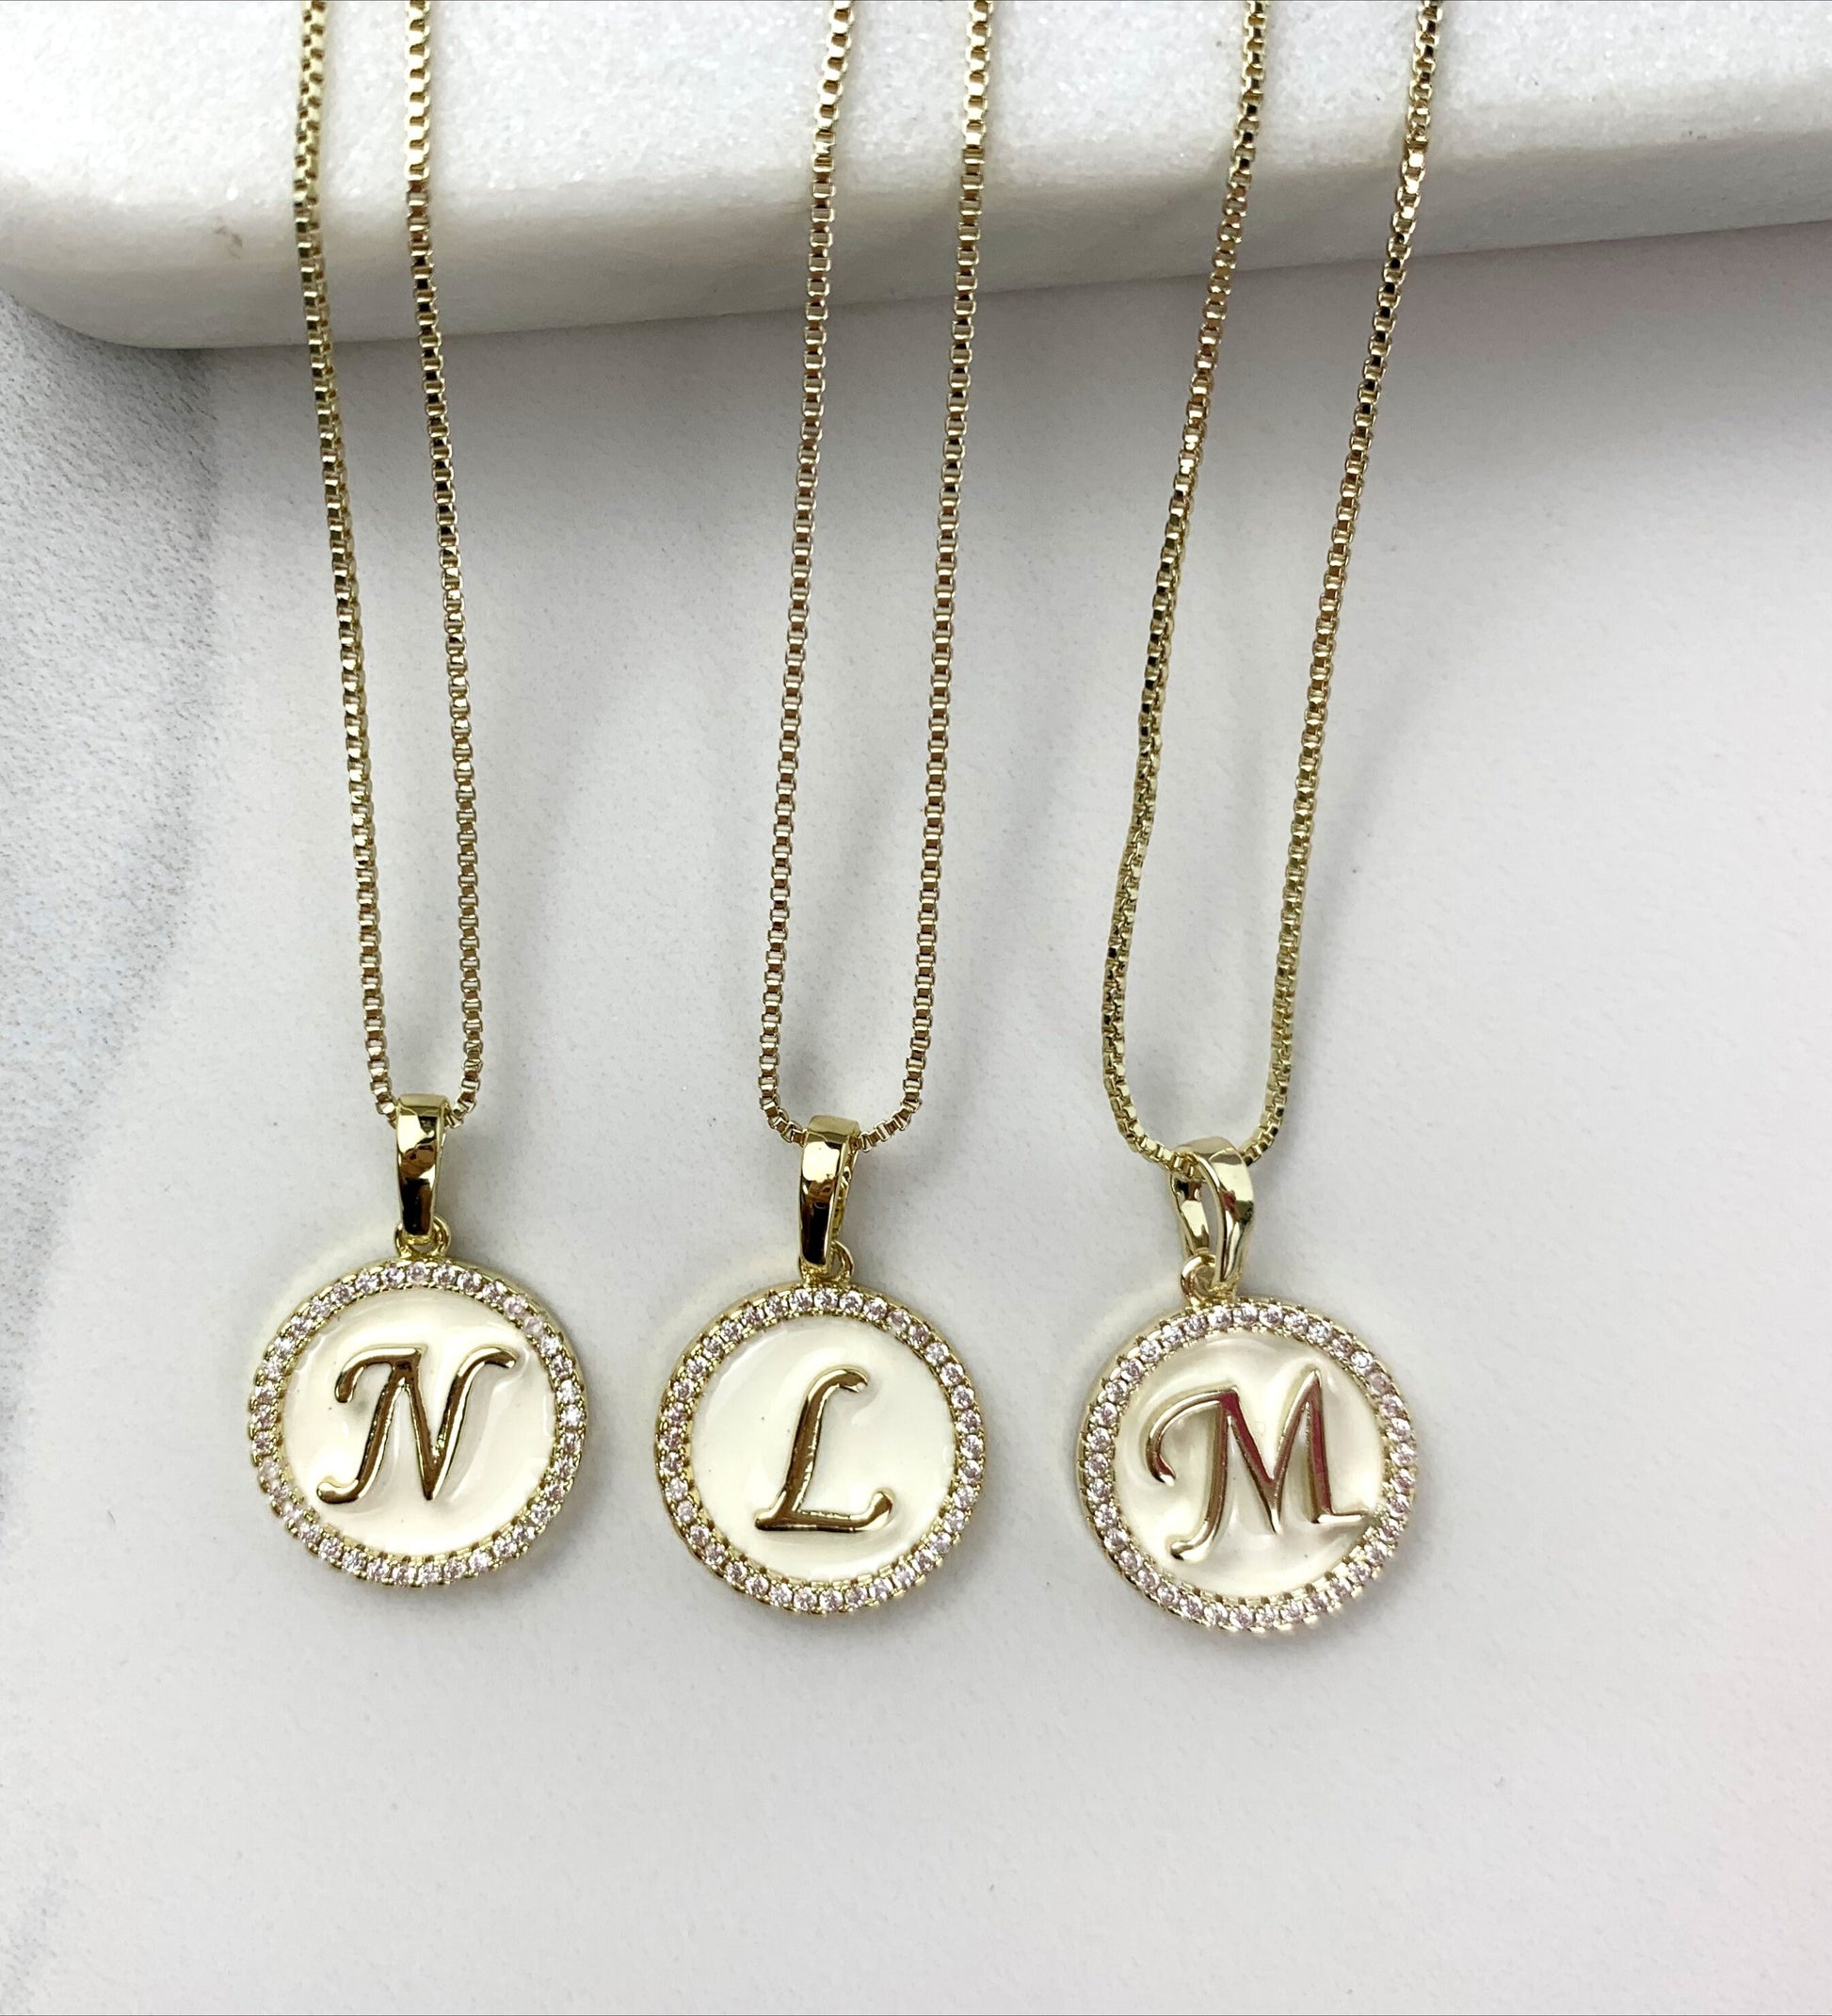 18k Gold Filled With Zirconia Initials Charms Fancy Necklace Wholesale Jewelry Supplies